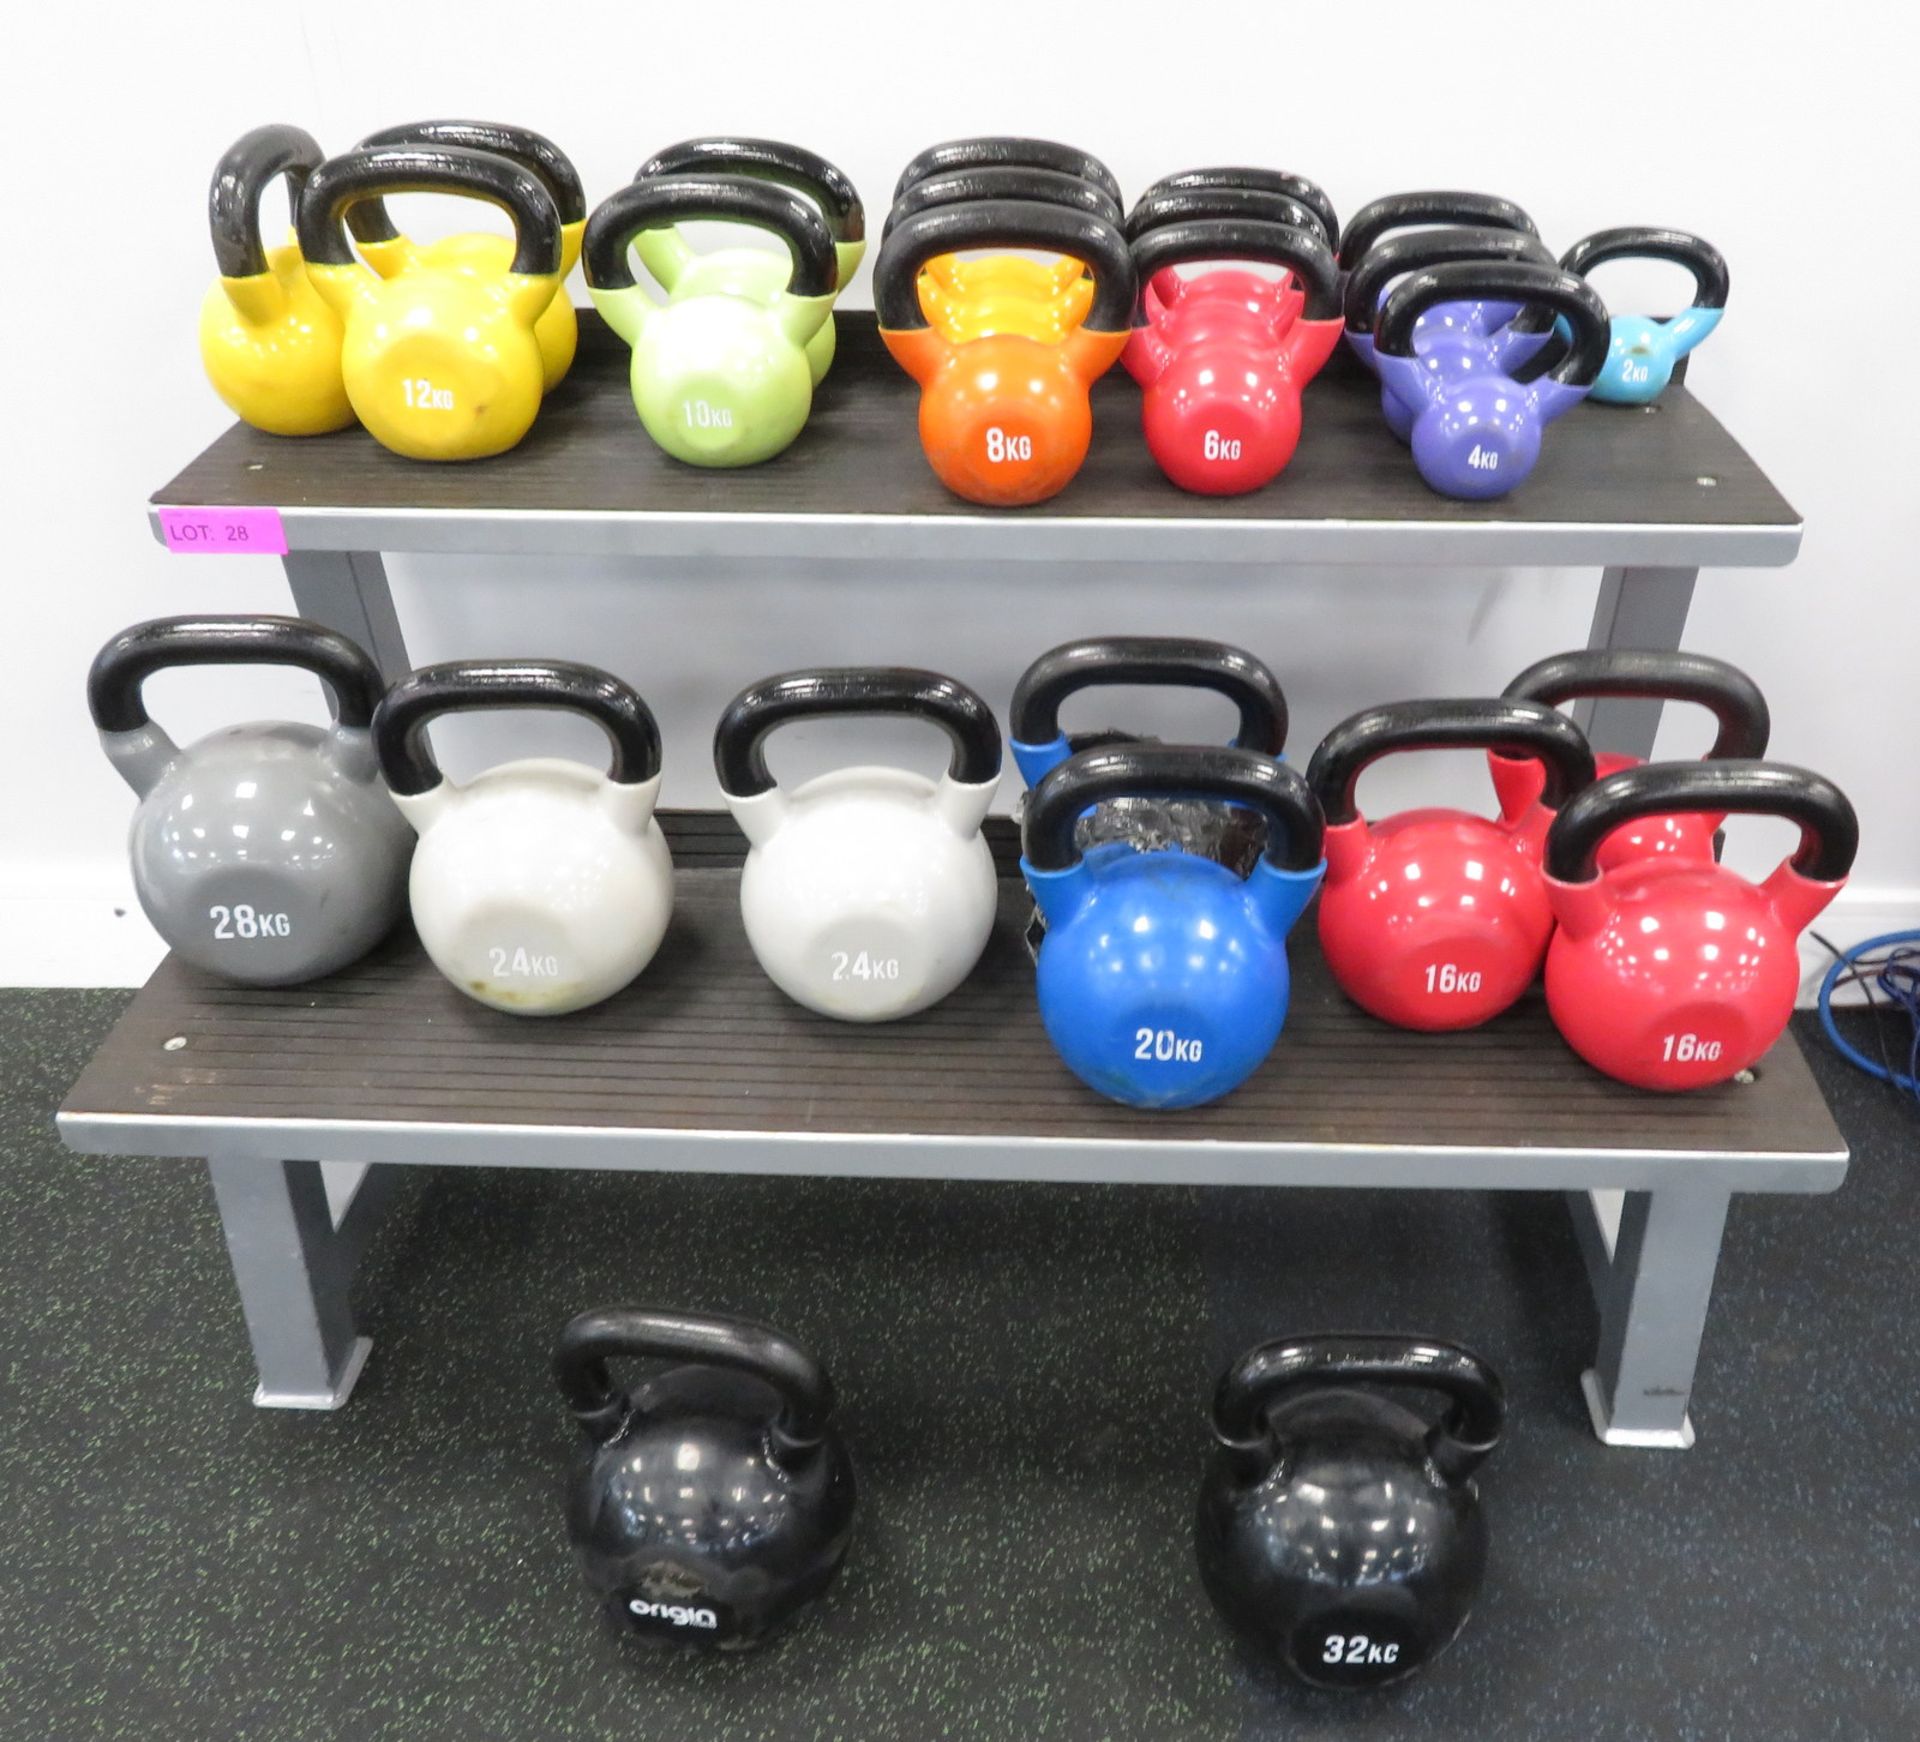 25x Origin Kettle Bell Set With Rack. Weights Range From 2kg - 32kg.